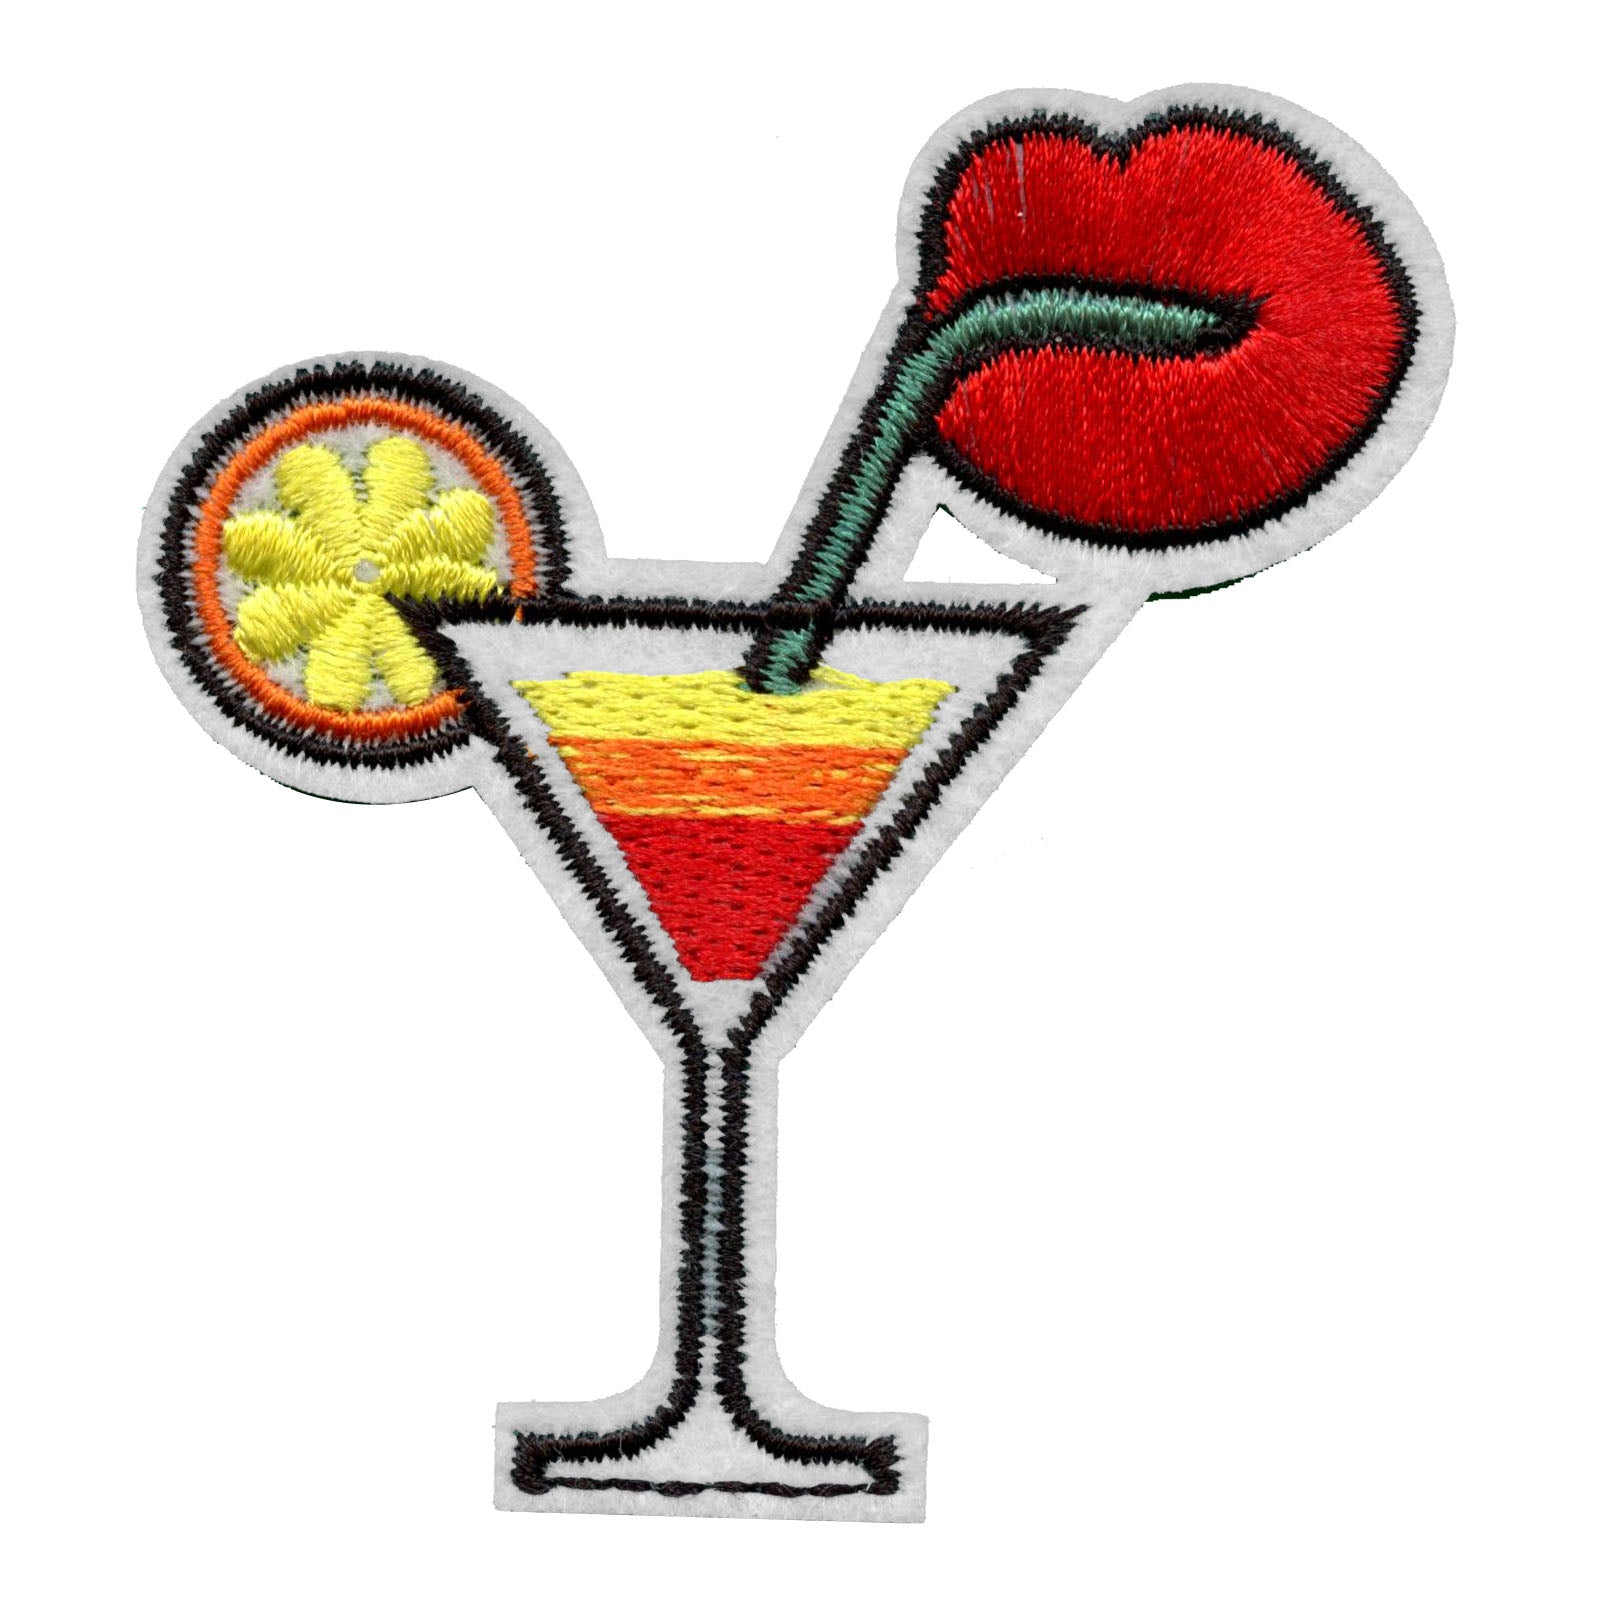 Drinking Martini Embroidered Applique Iron On Patch 